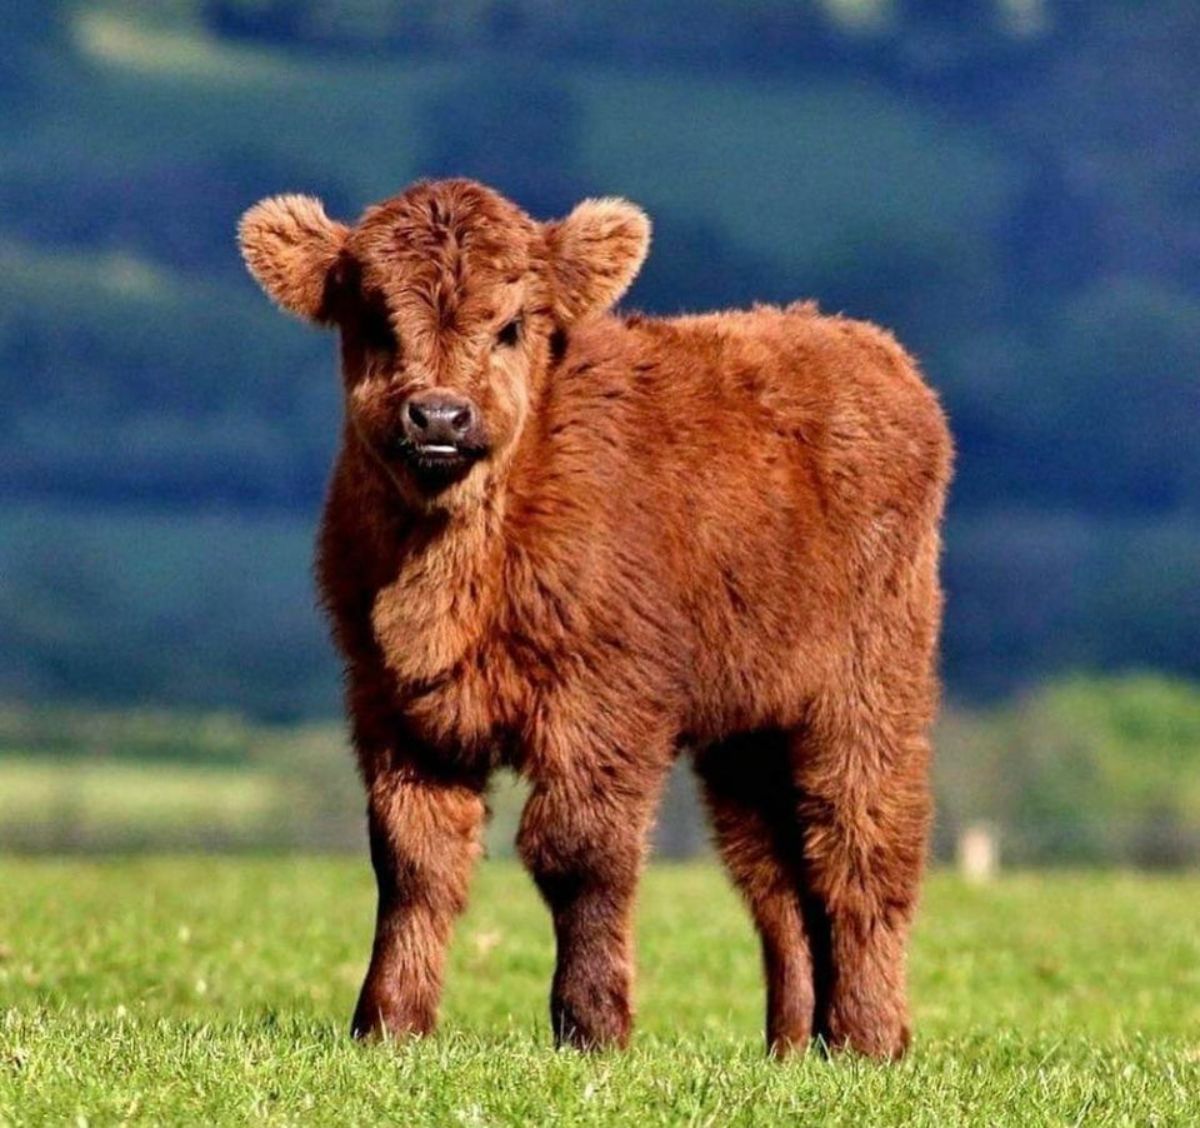 brown calf standing in a field